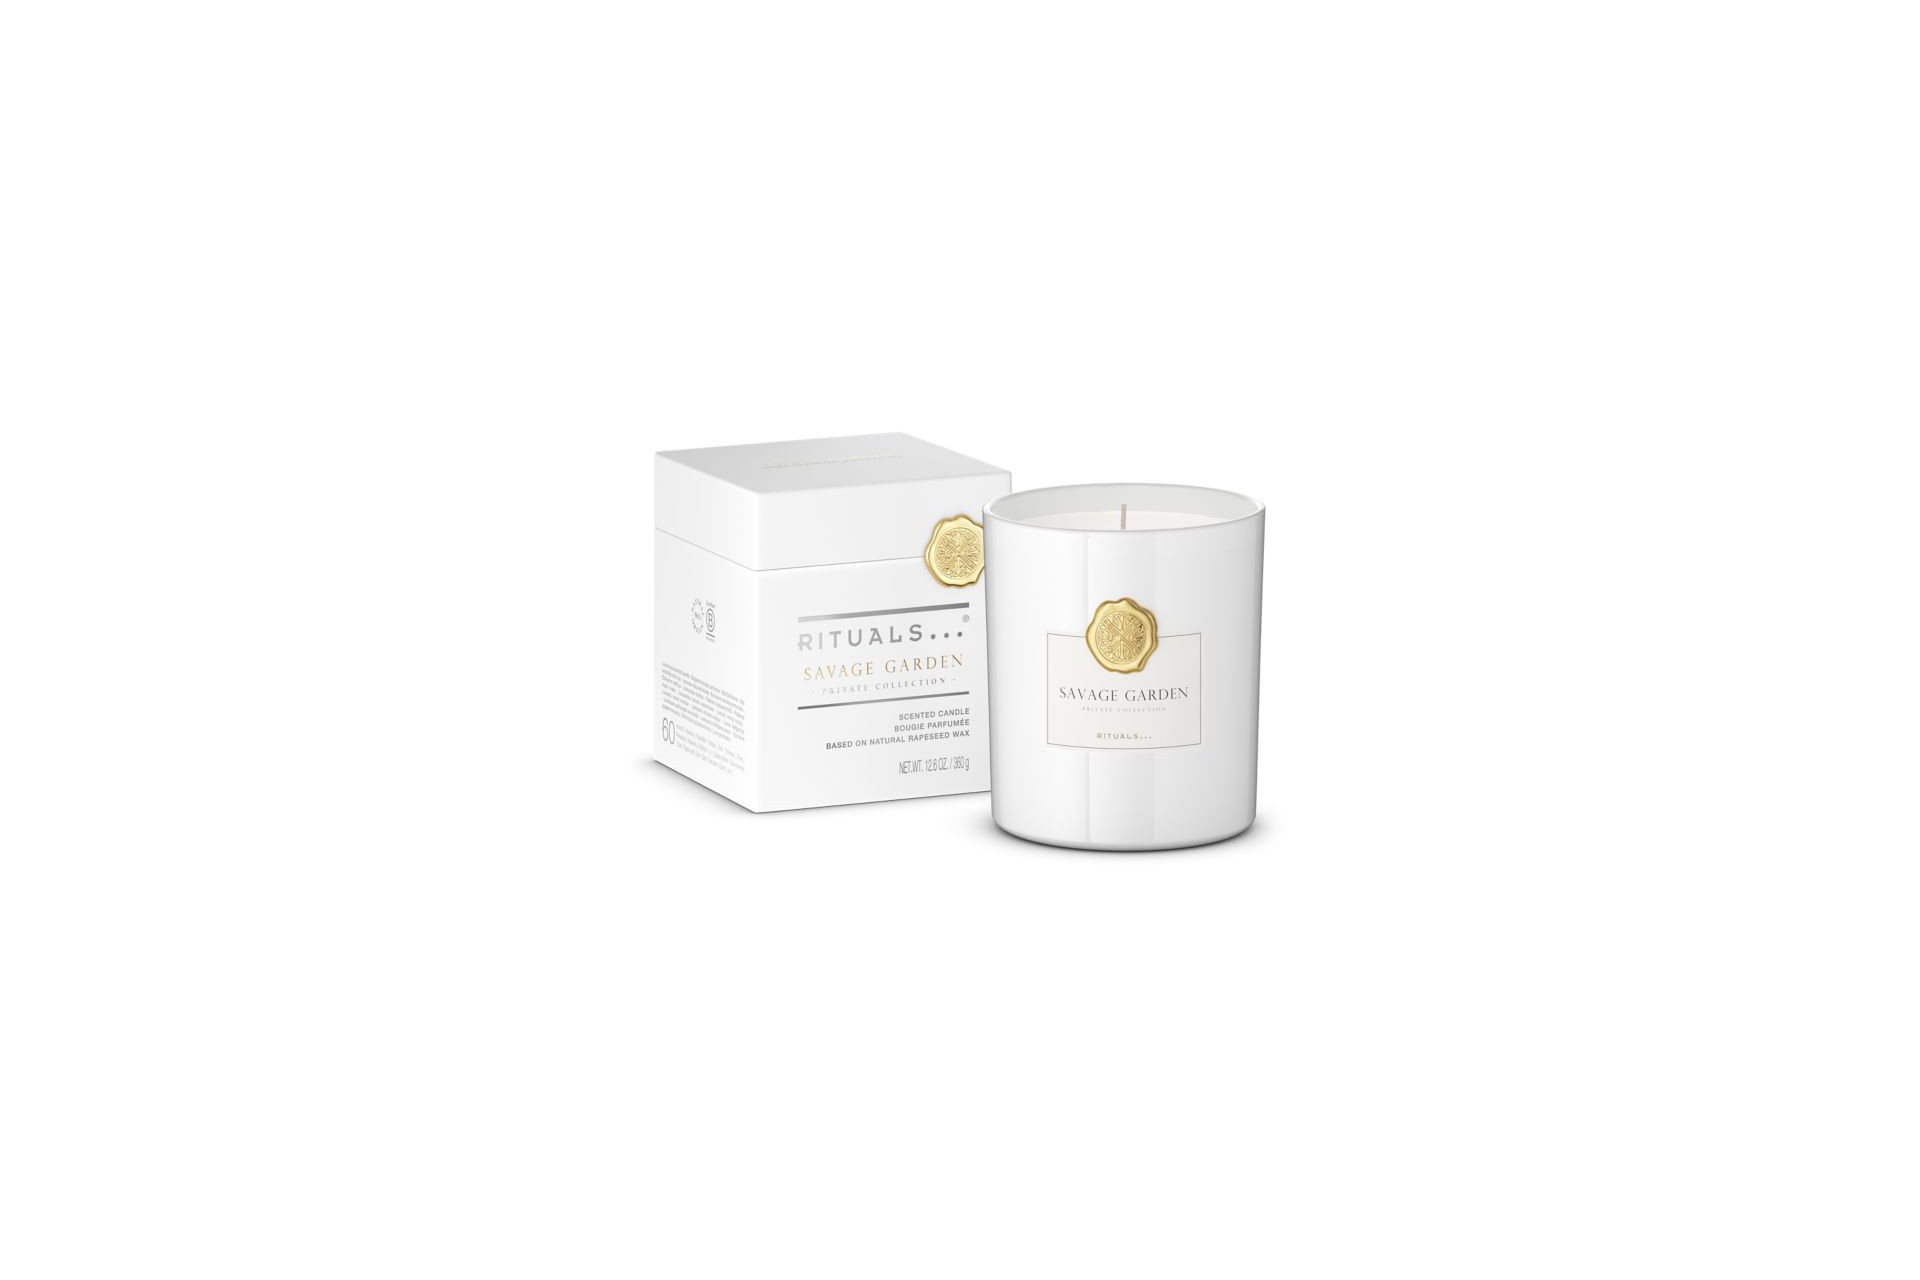 Acheter Rituals Savage Garden Scented Candle